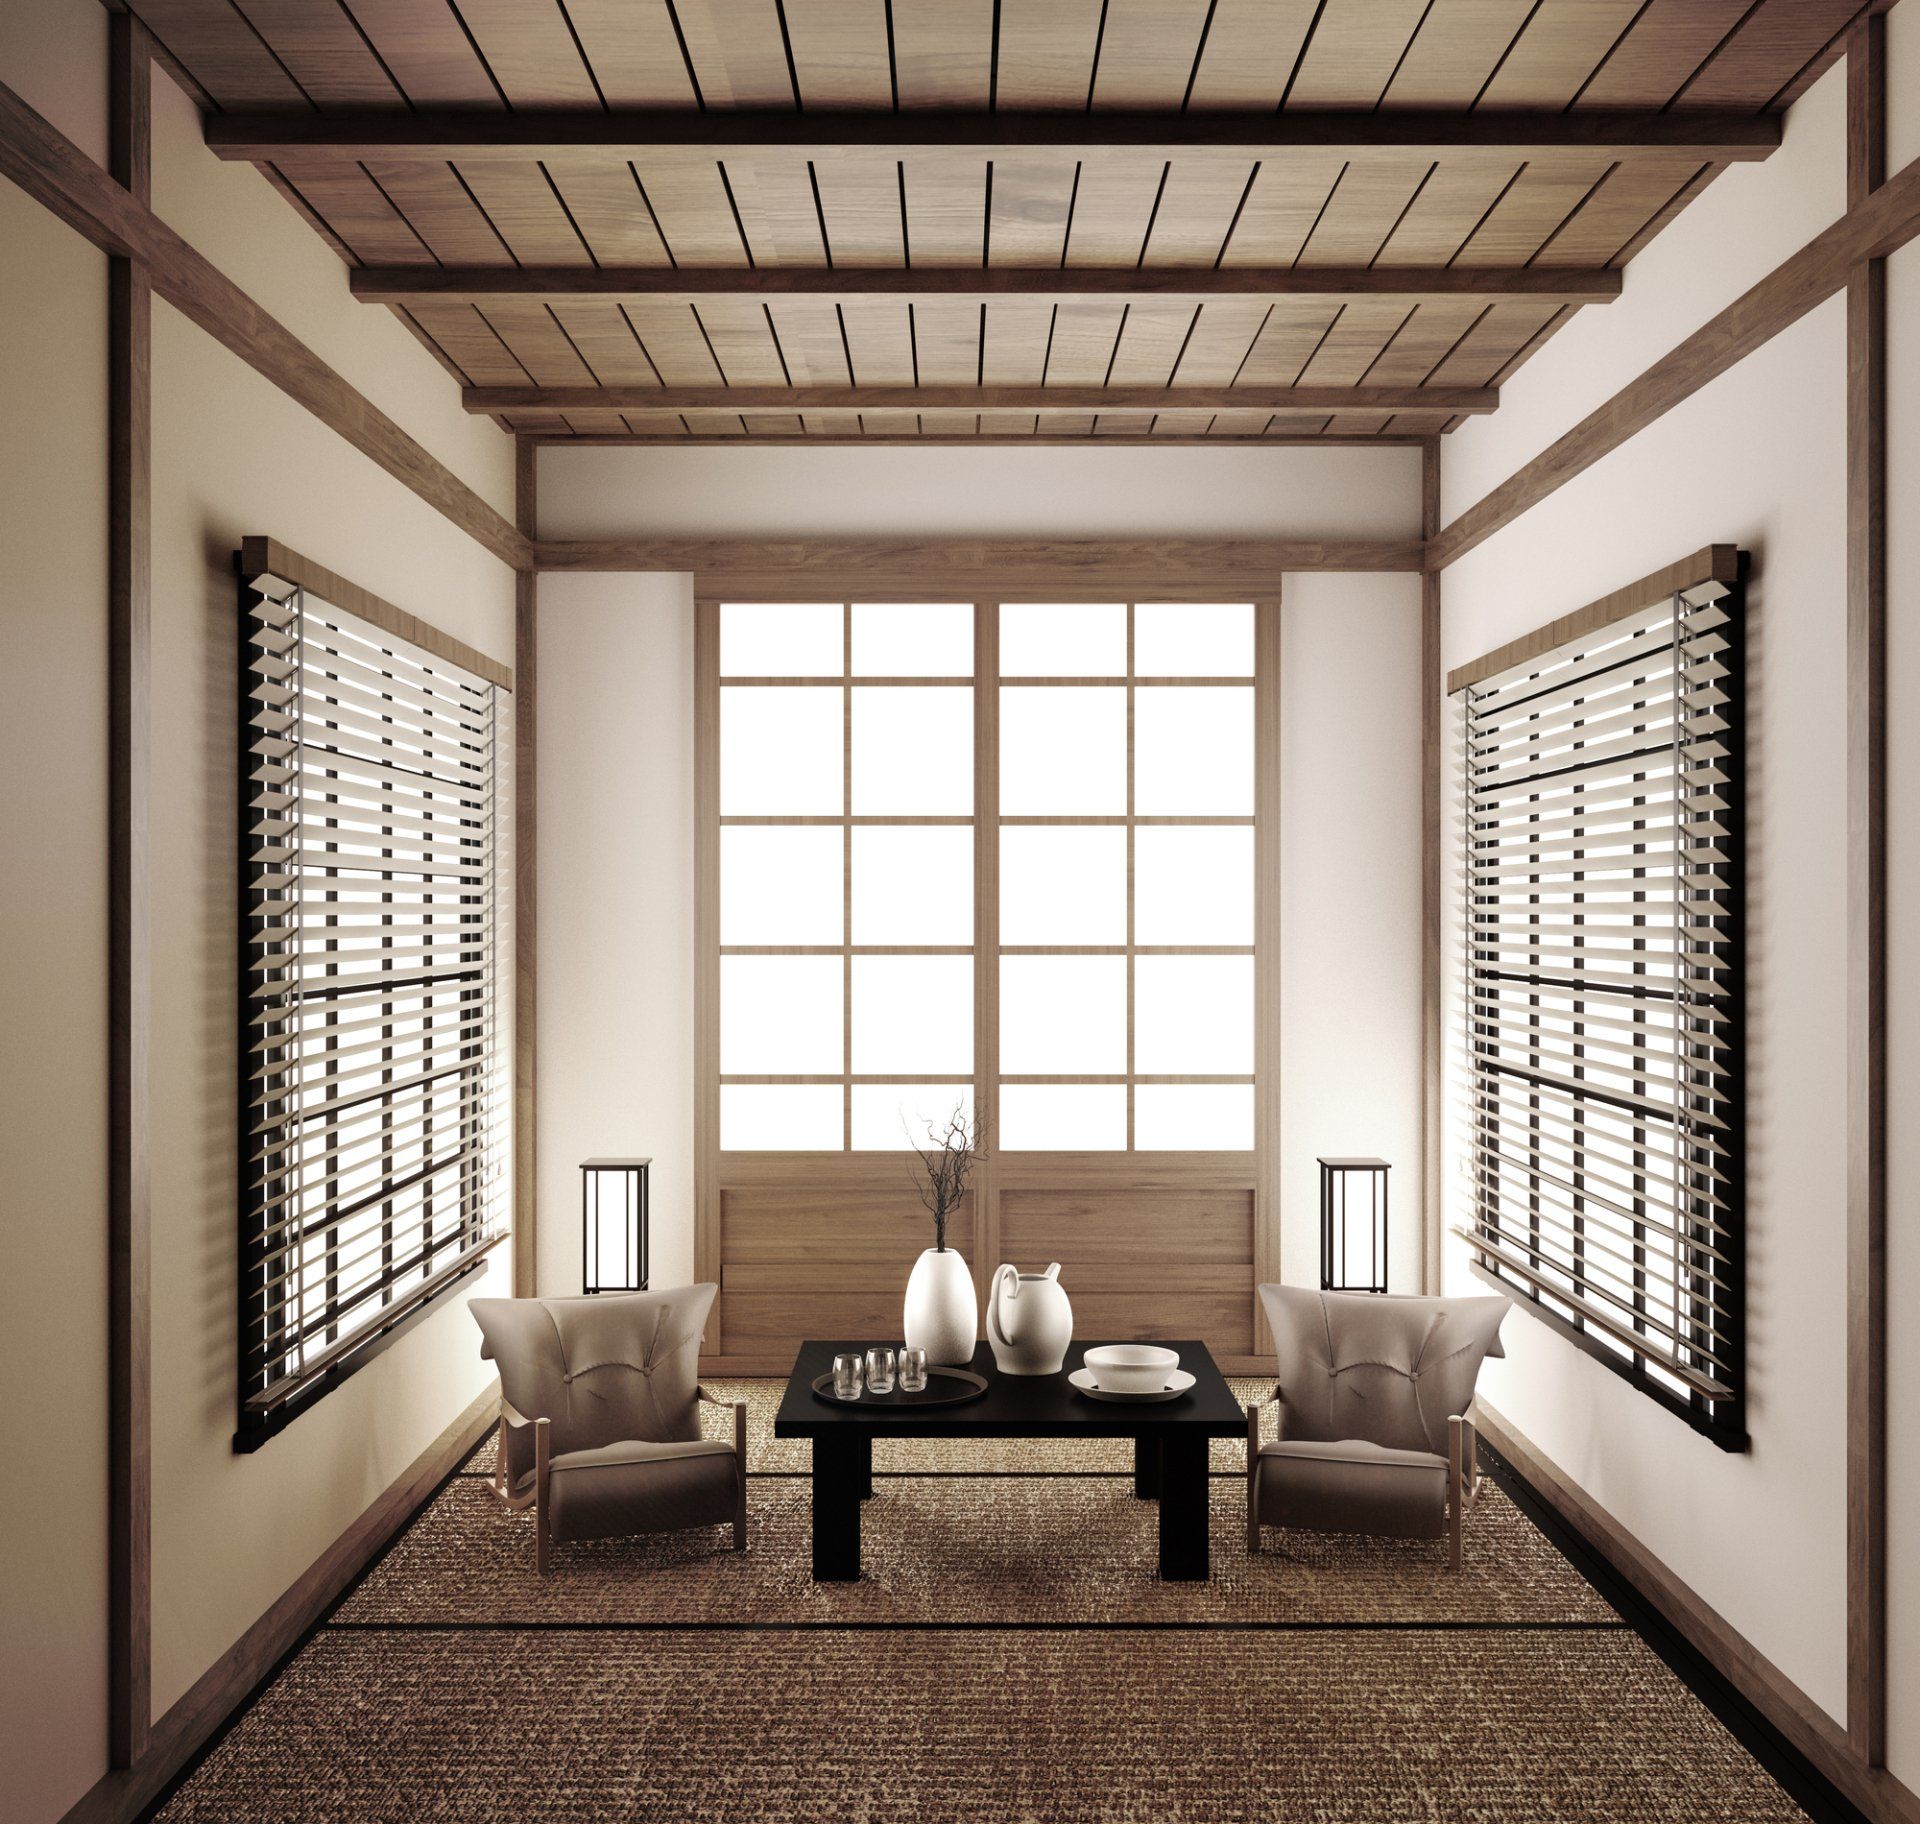 Japanese style lounge with timber shutters open on side walls, timber sliding doors at back, and tiber cieling. Two chairs site either side of a set coffee table.